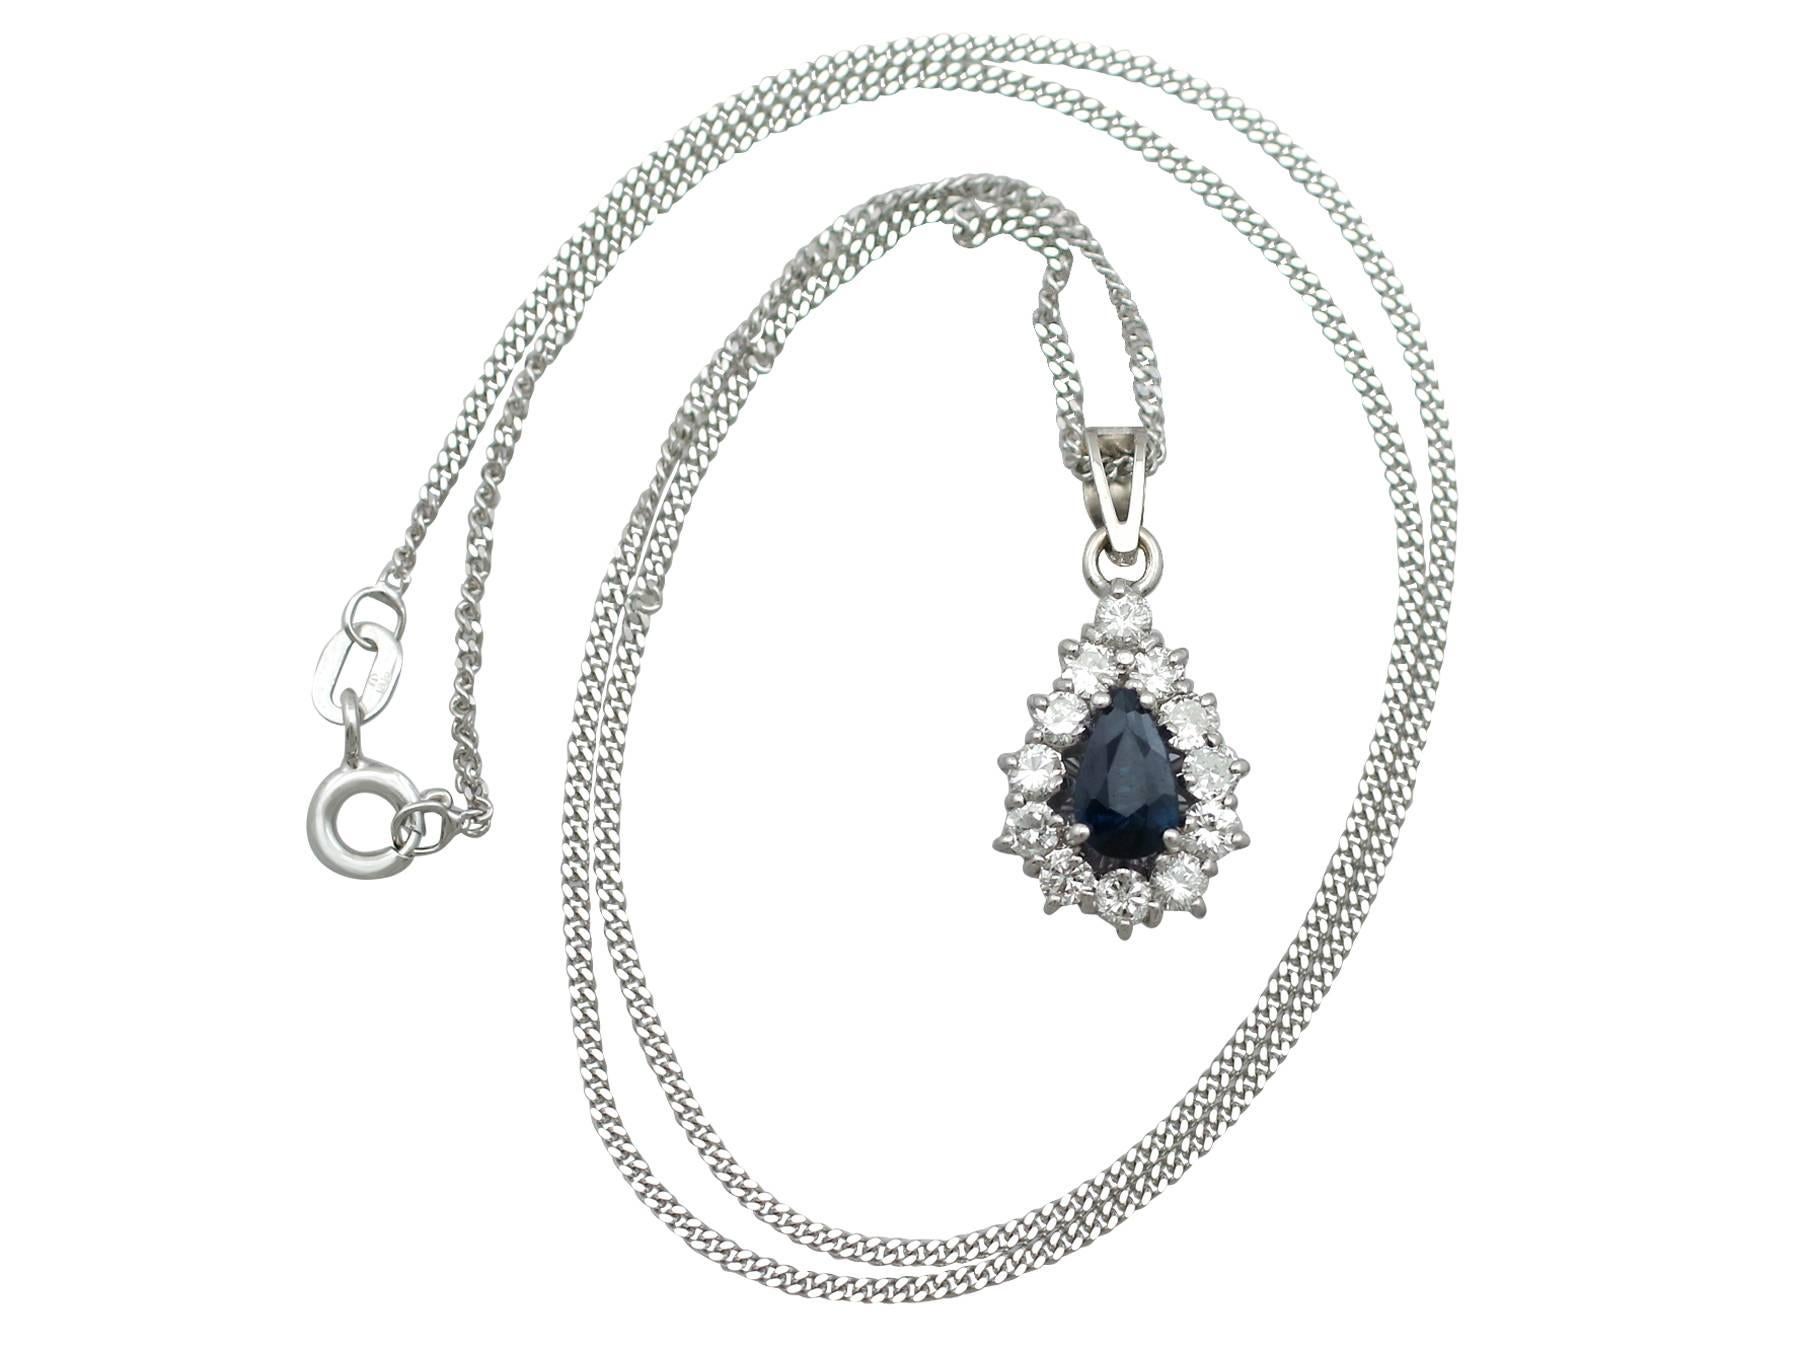 An impressive vintage 0.79 carat blue sapphire and 0.76 carat diamond, 14 carat white gold cluster pendant; part of our diverse gemstone jewelry and collections

This fine and impressive sapphire cluster pendant has been crafted in 14 ct white